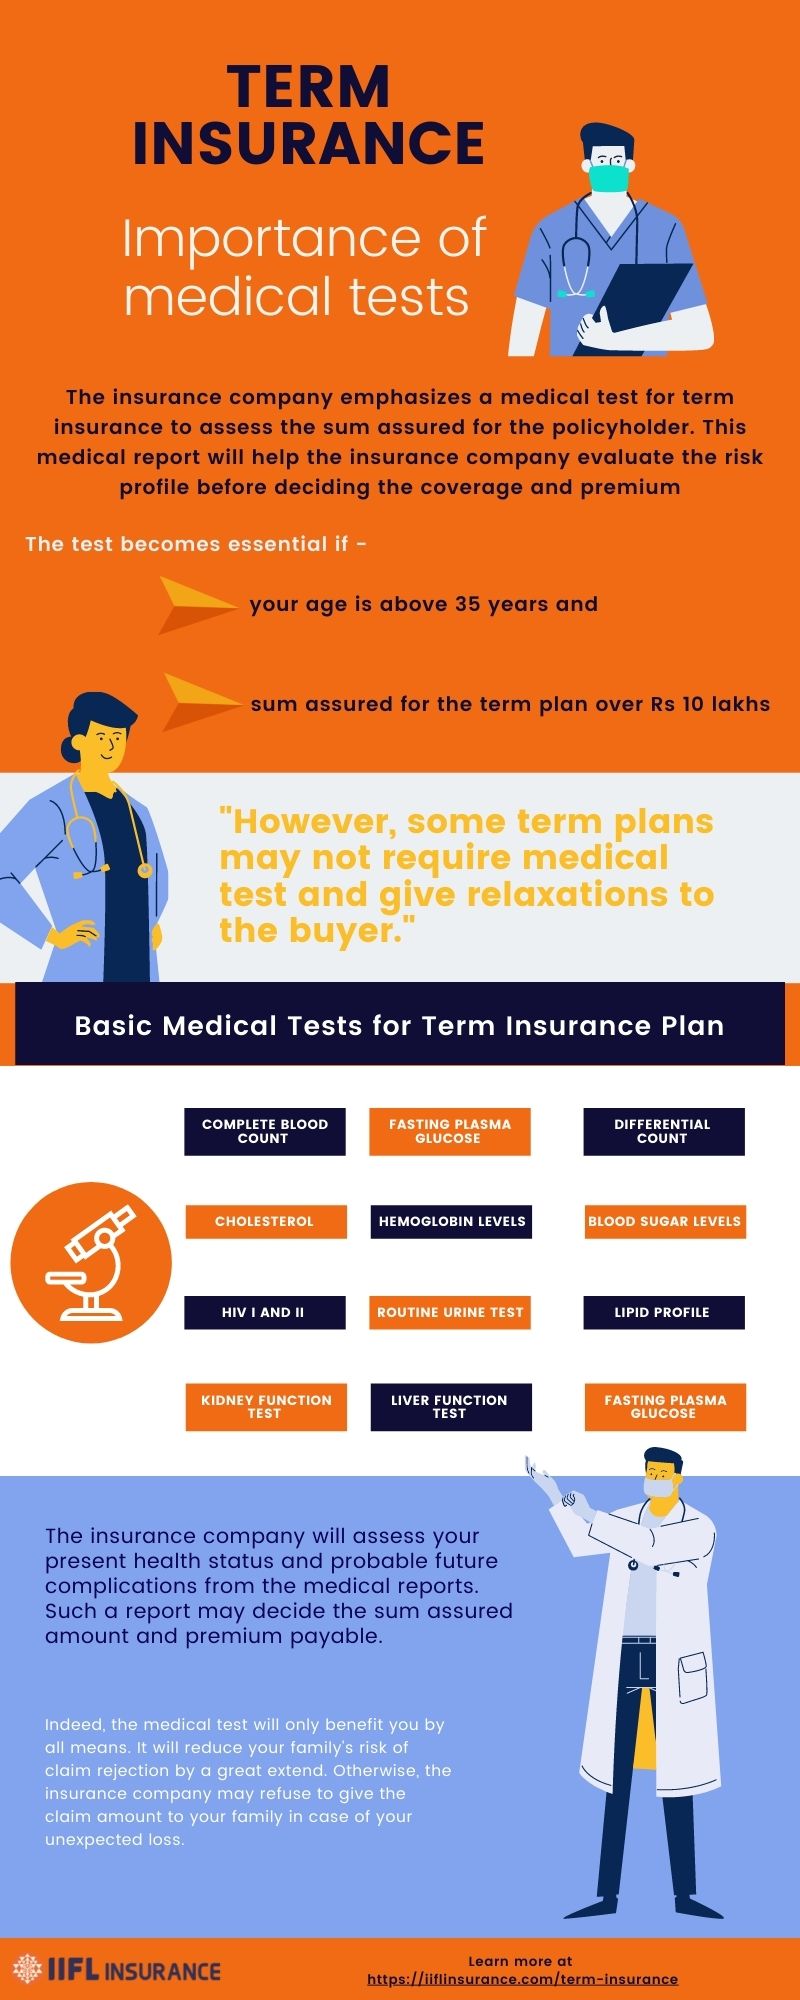  importance of medical tests in term insurance